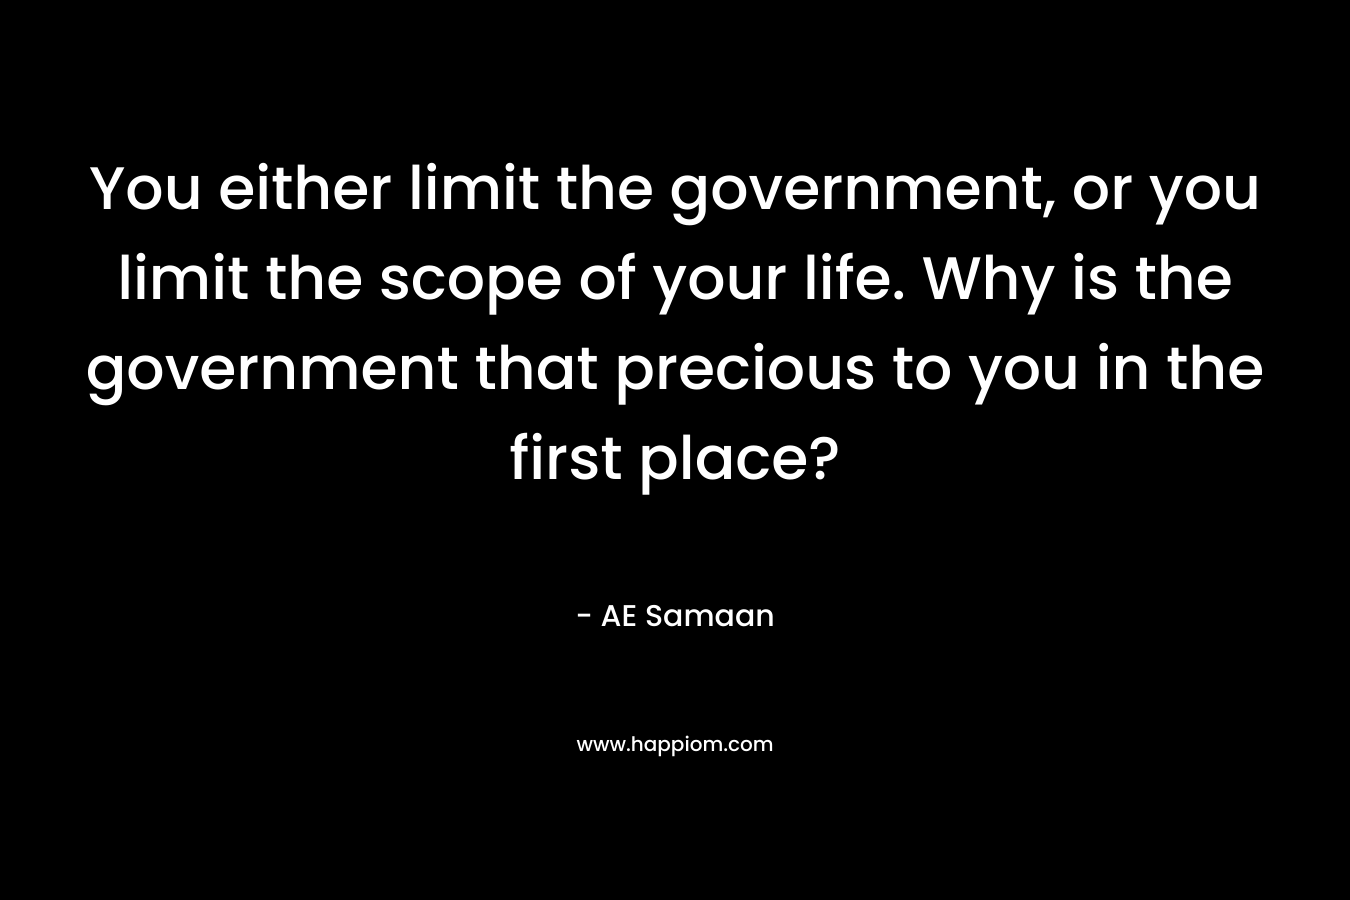 You either limit the government, or you limit the scope of your life. Why is the government that precious to you in the first place?